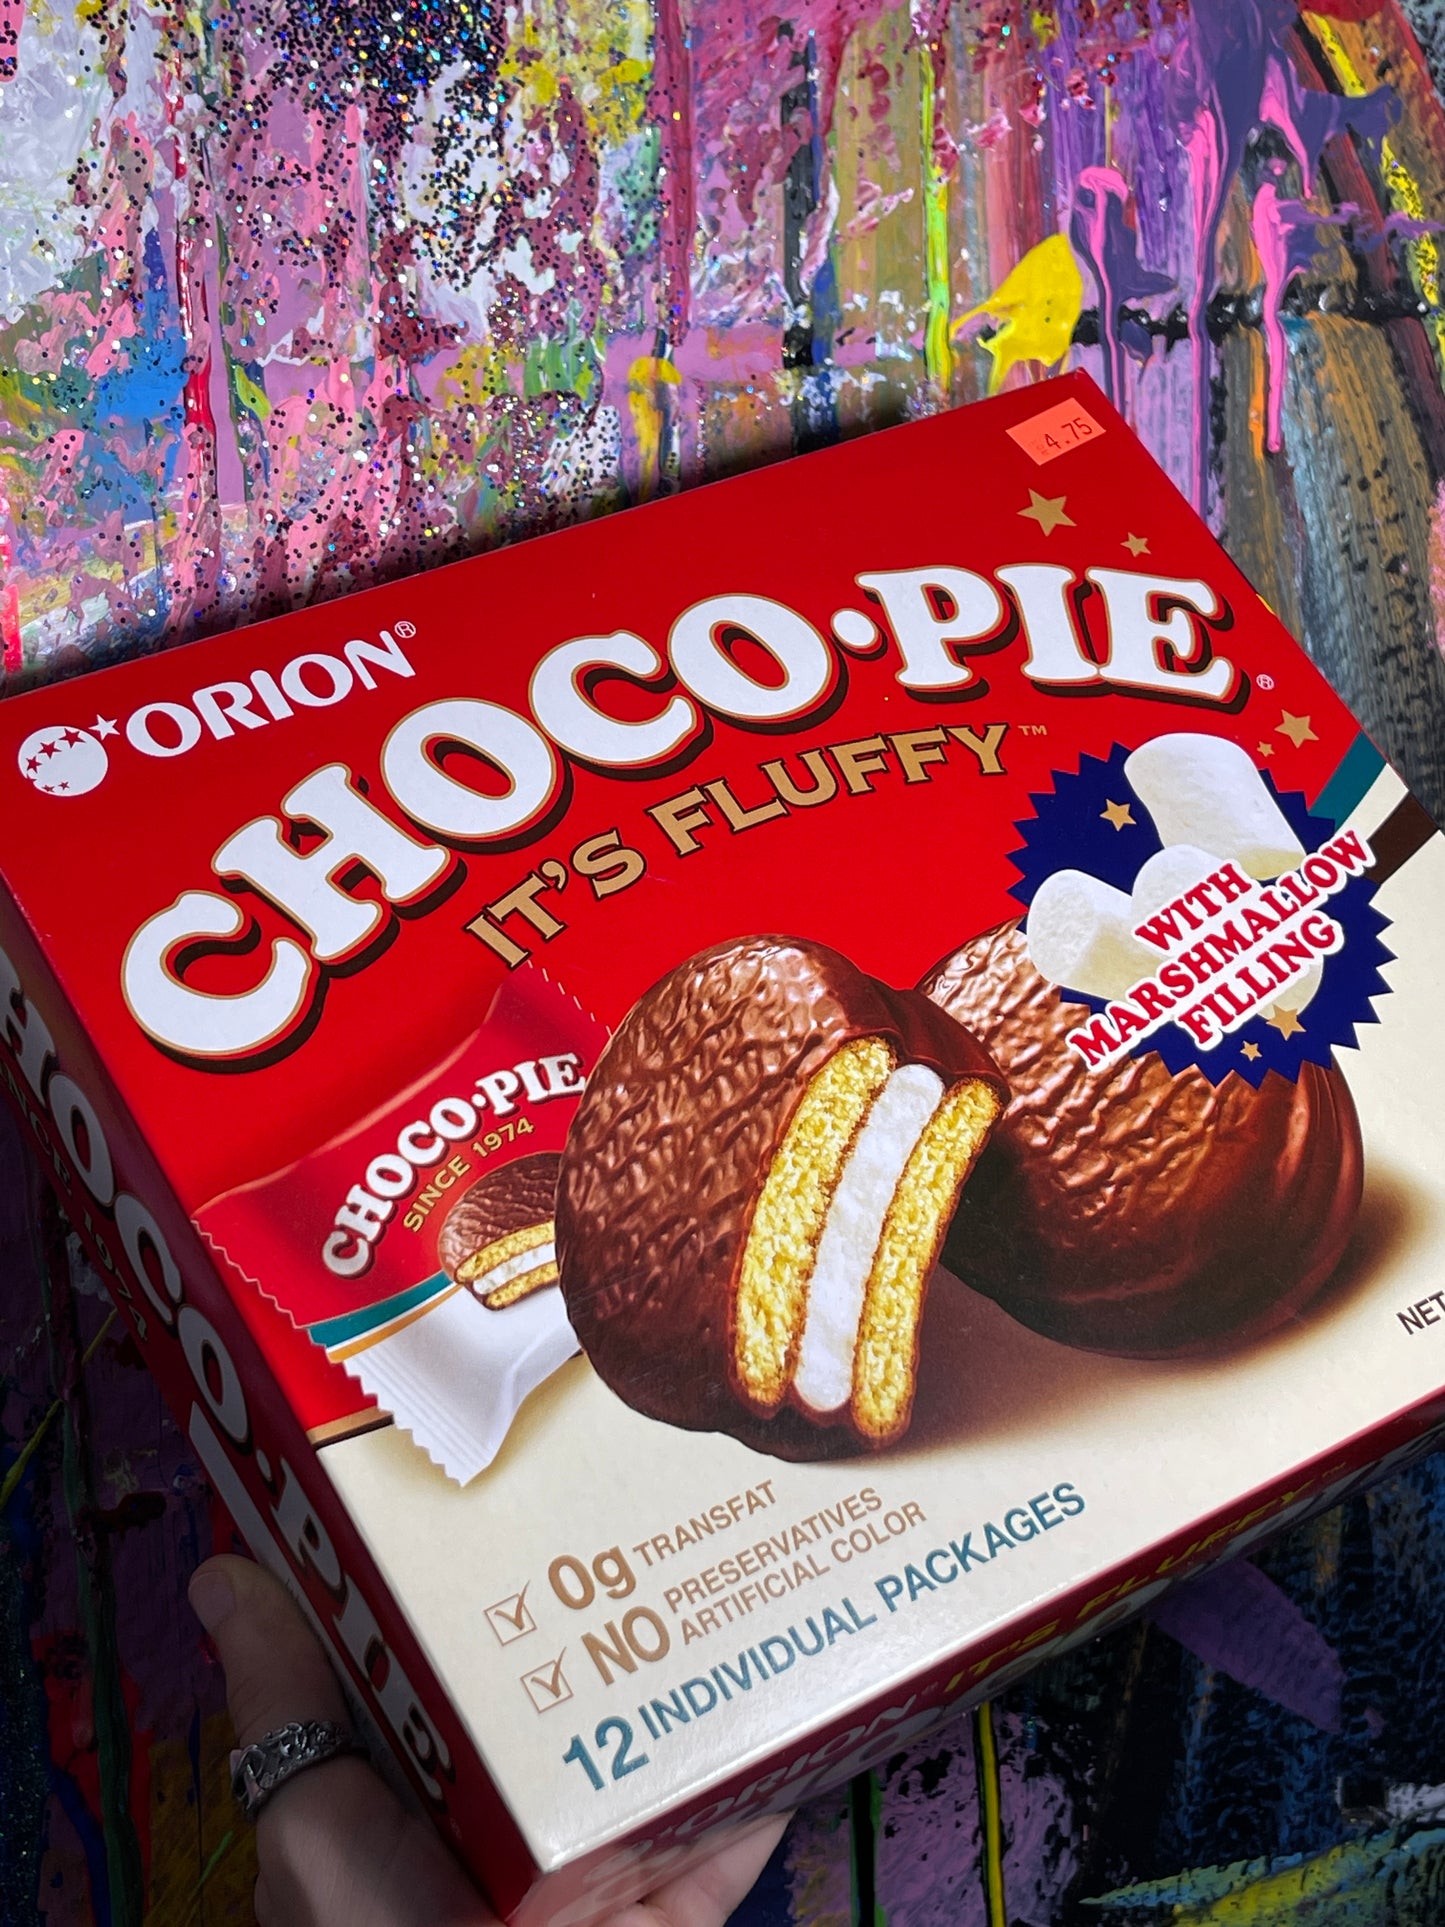 Orion Choco Pie Marshmallow Filled Pies 12pc